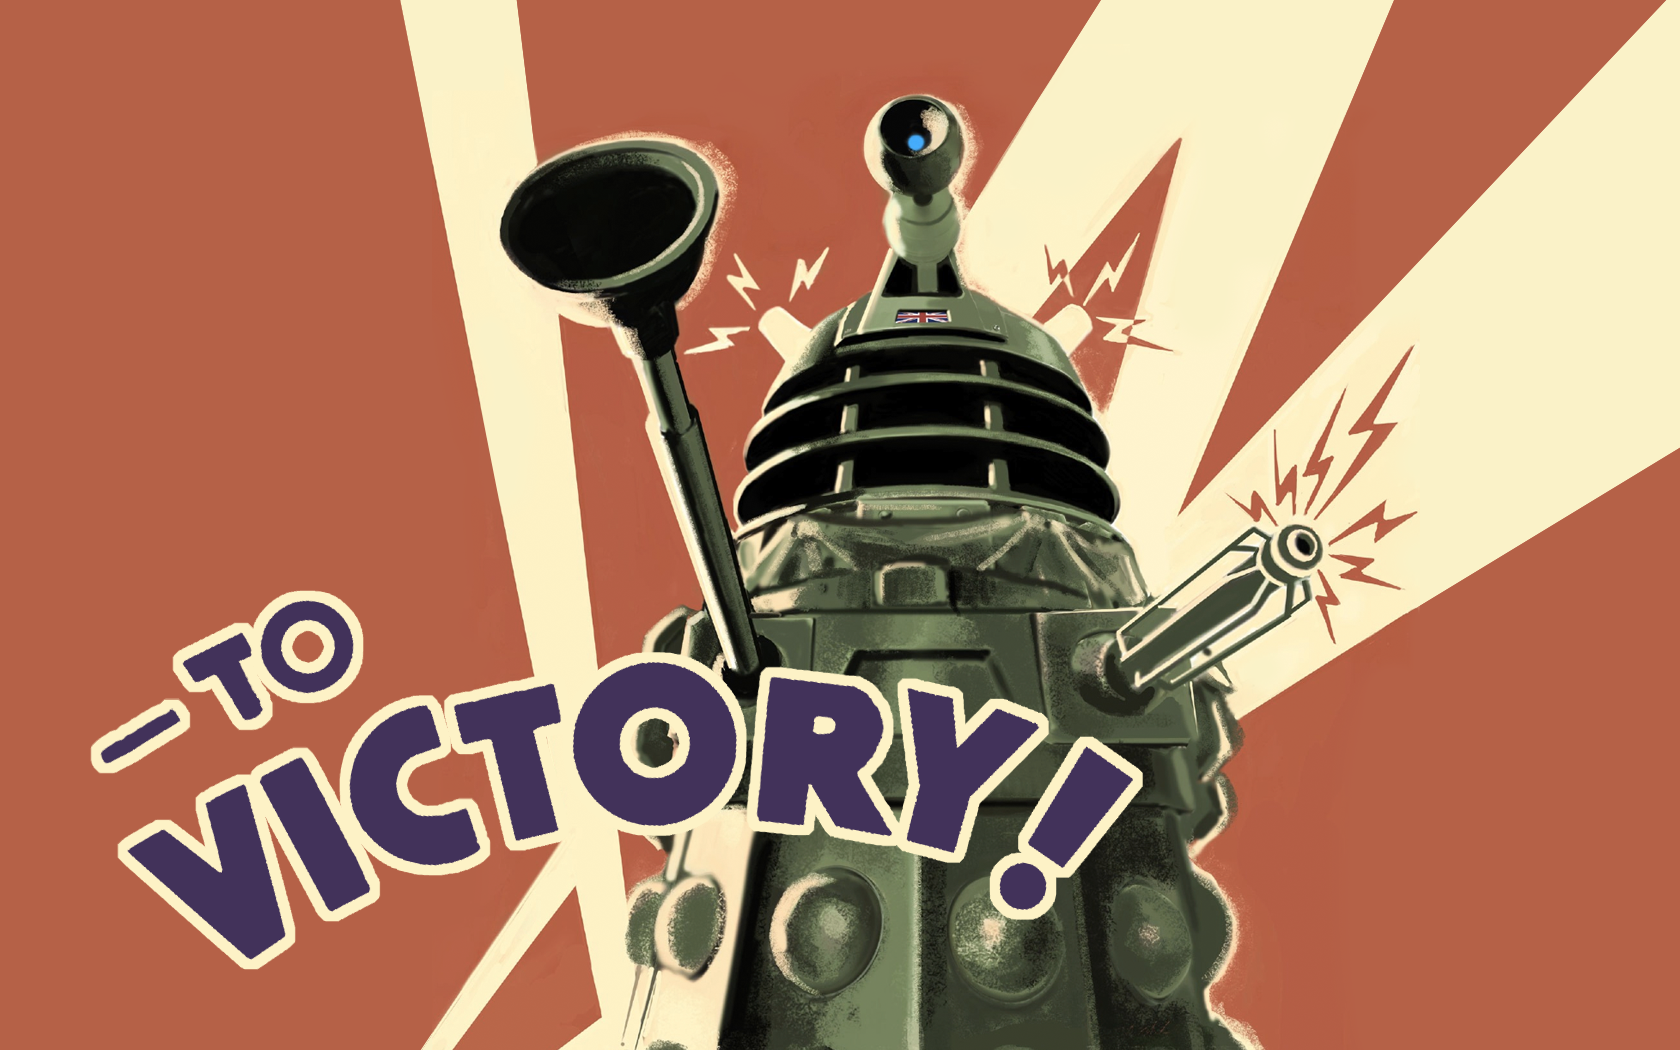 Dalek iphone wallpaper | Doctor who wallpaper, Doctor who art, Doctor who